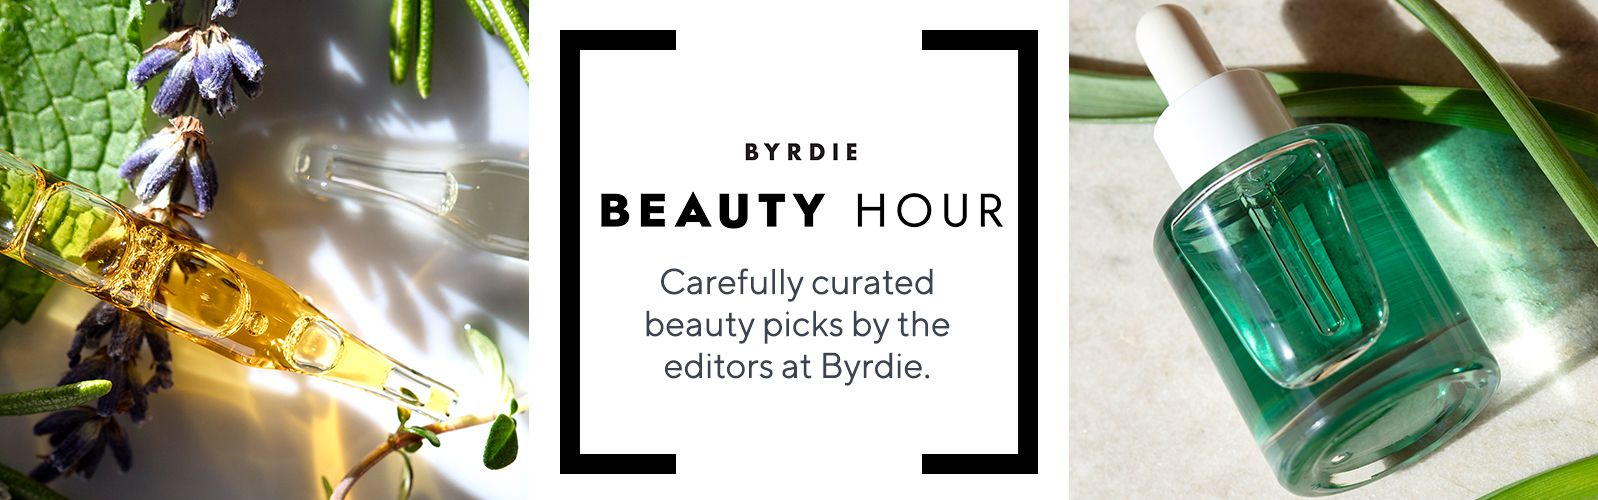 Birdie Beauty Hour - Carefully curated beauty picks by the editors at Byrdie. 